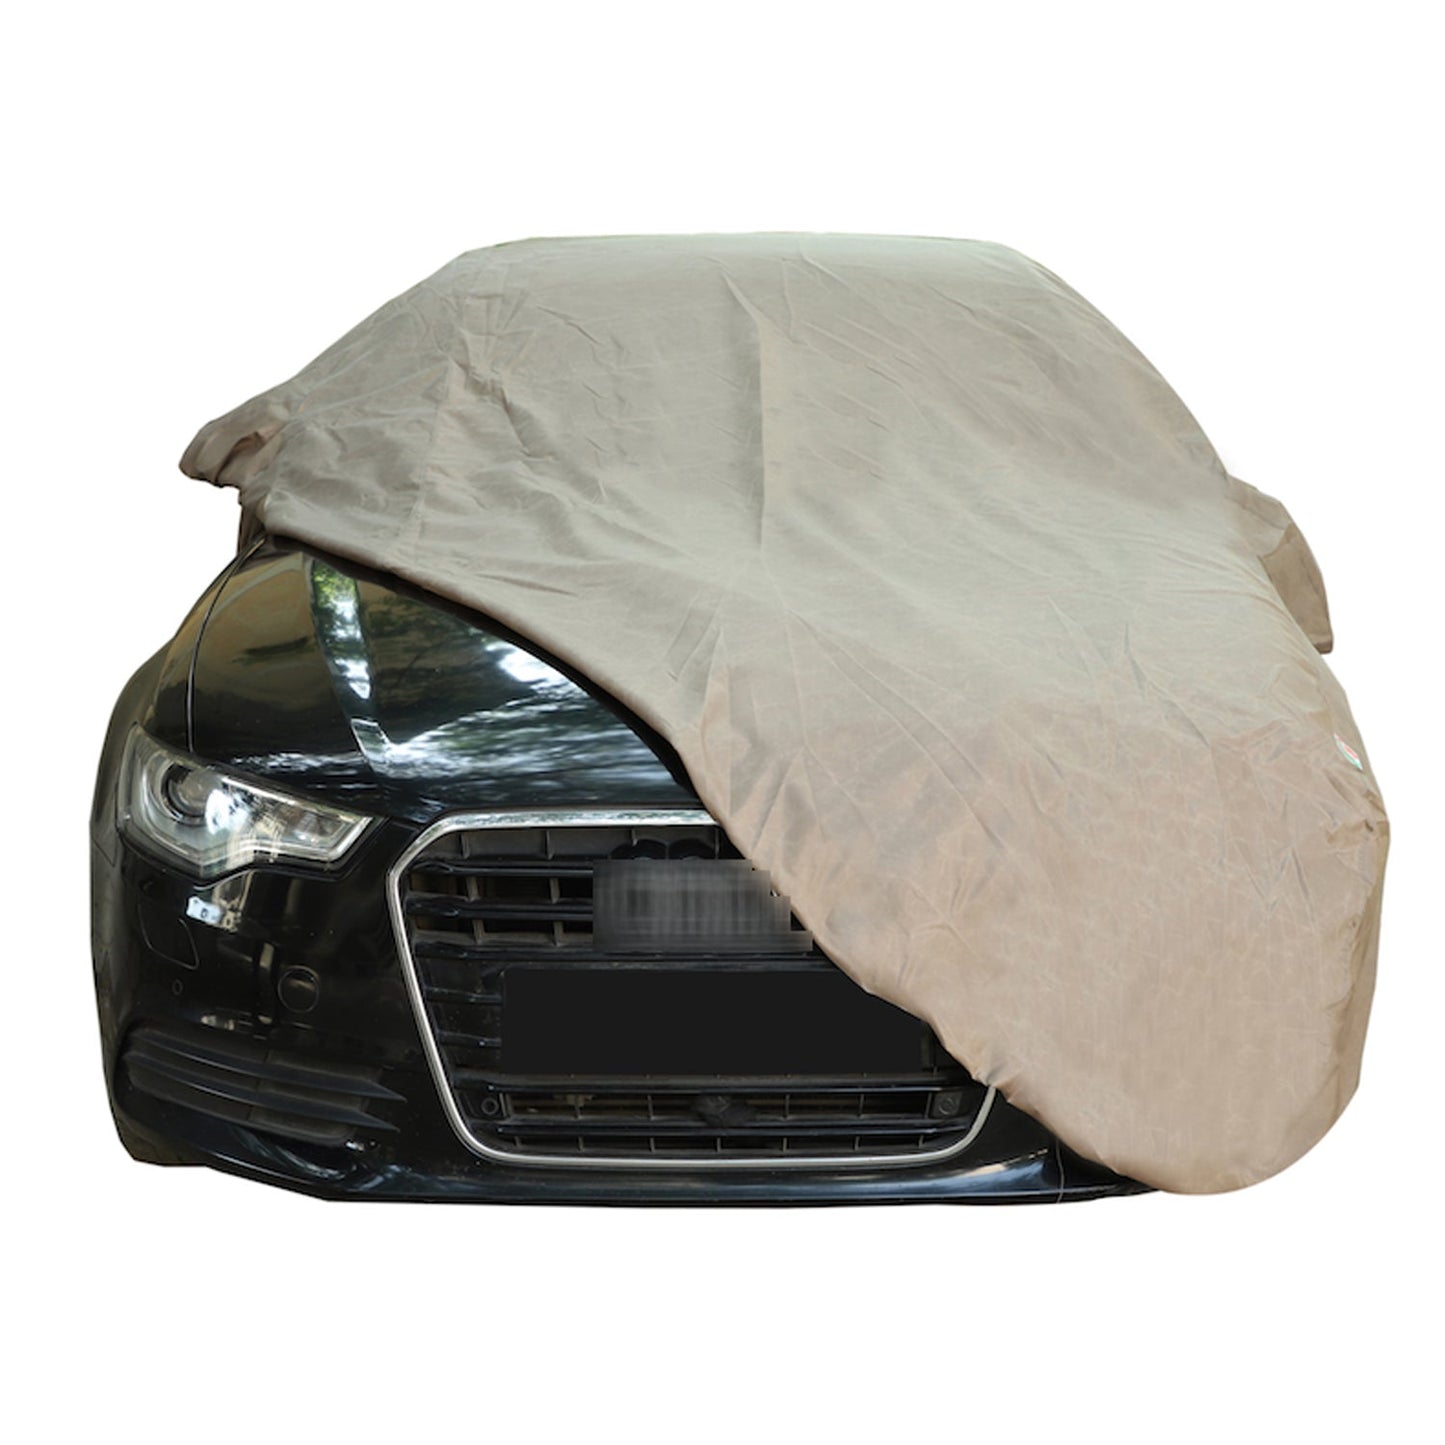 Oshotto Brown 100% Waterproof Car Body Cover with Mirror Pockets For Audi A7